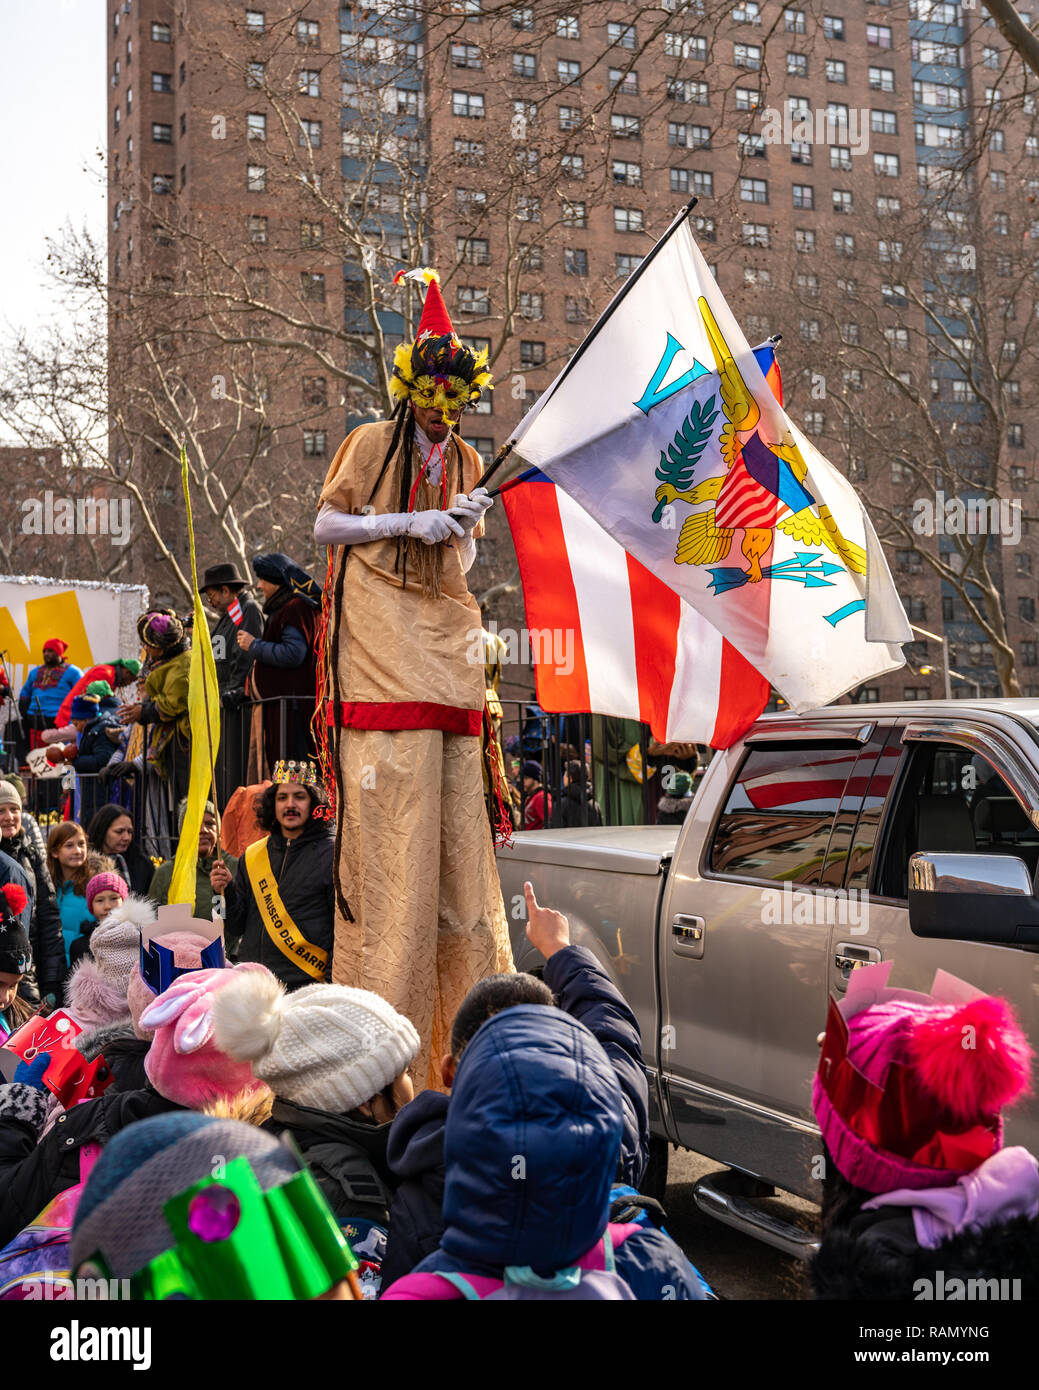 New York, USA. 4th Jan 2019. A performer on stilts entertains children during the 42nd Annual Three Kings Day Parade at El Barrio (East Harlem, New York city), Organized by El Museo del Barrio, the event celebrates the popular belief that three wise men visited Jesus. Credit: Enrique Shore/Alamy Live News Stock Photo